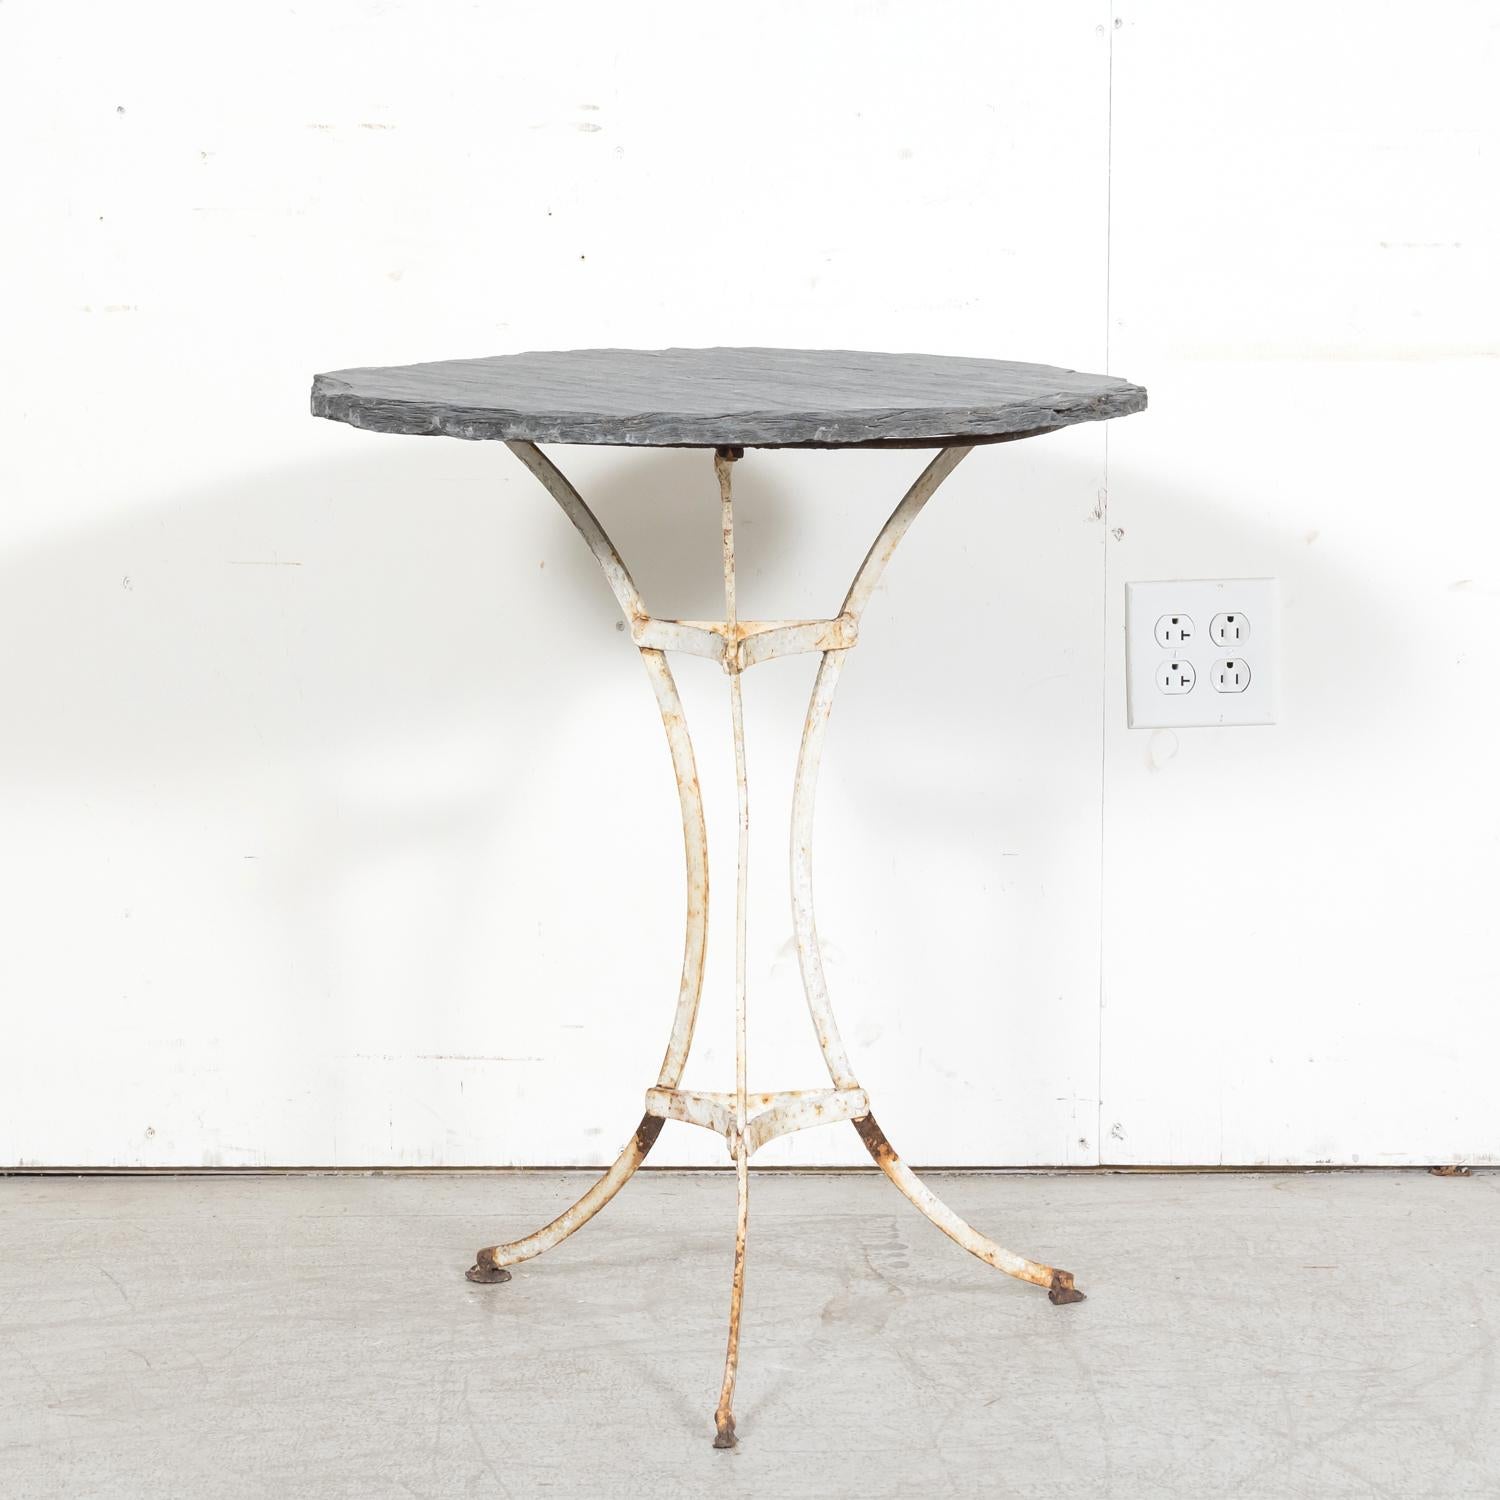 A 19th century French cast iron bistro or garden table, circa 1880s, featuring a slate top resting on a white painted iron tri-form base. The base boasts three scrolled legs joined with a circular iron stretcher, adding both stability and visual